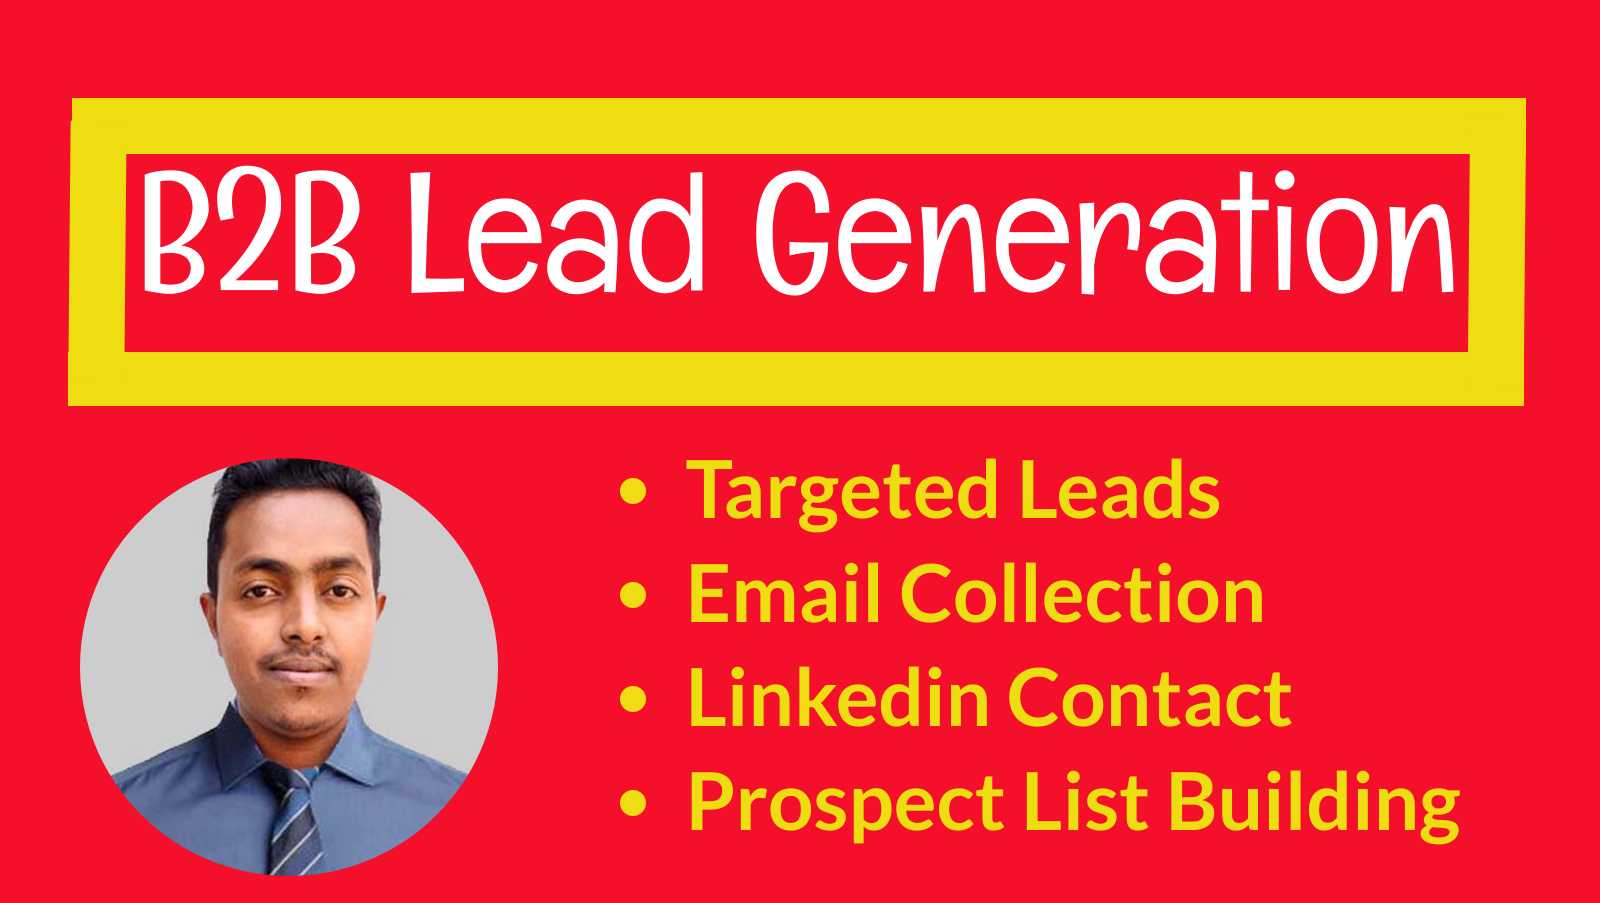 I will linkedin lead generation,data entry and list building